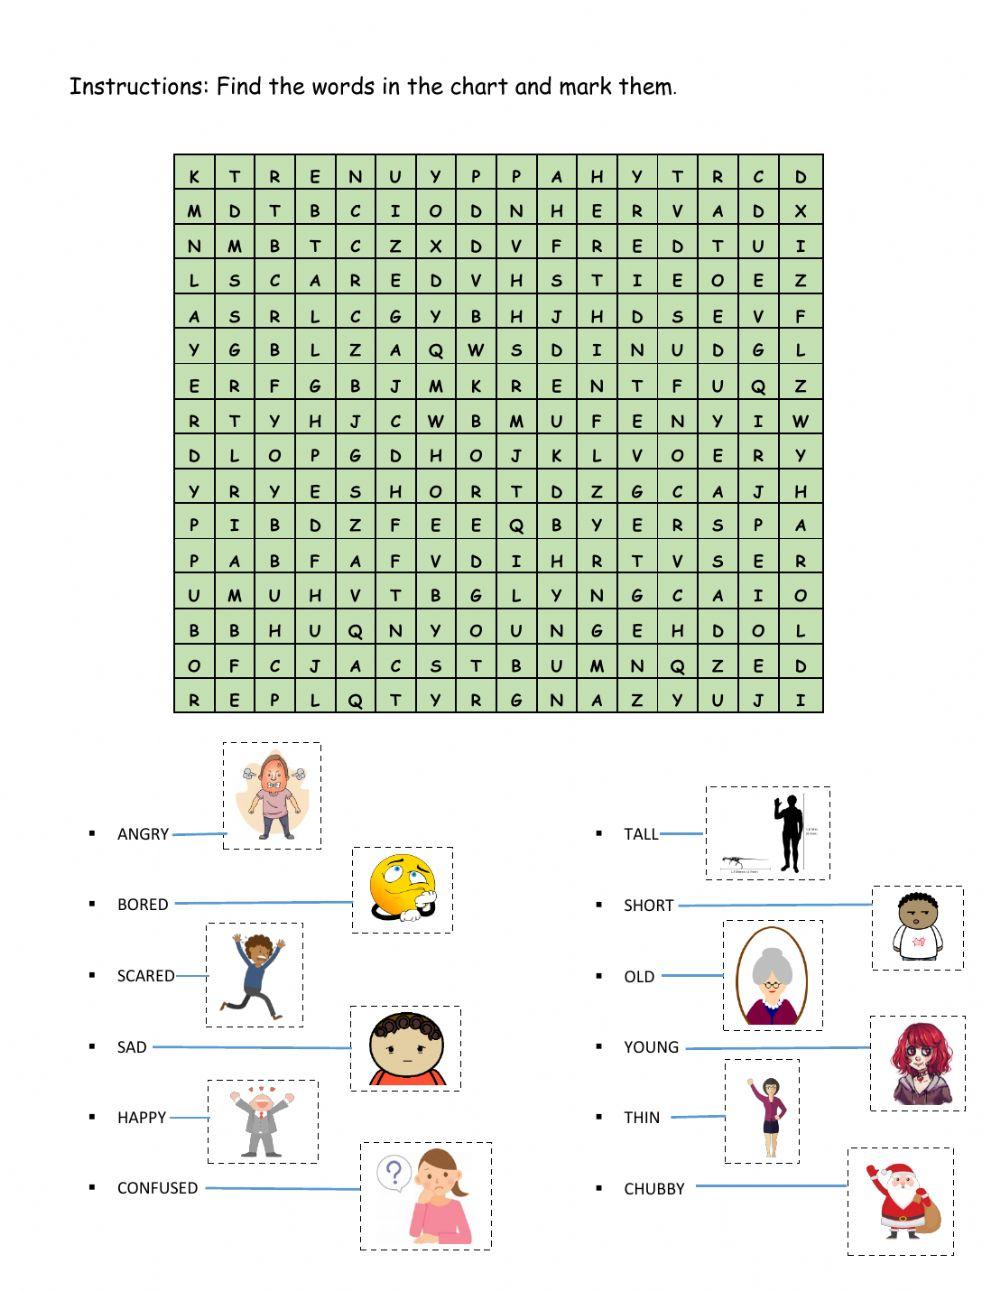 Physical appearance and emotions word search